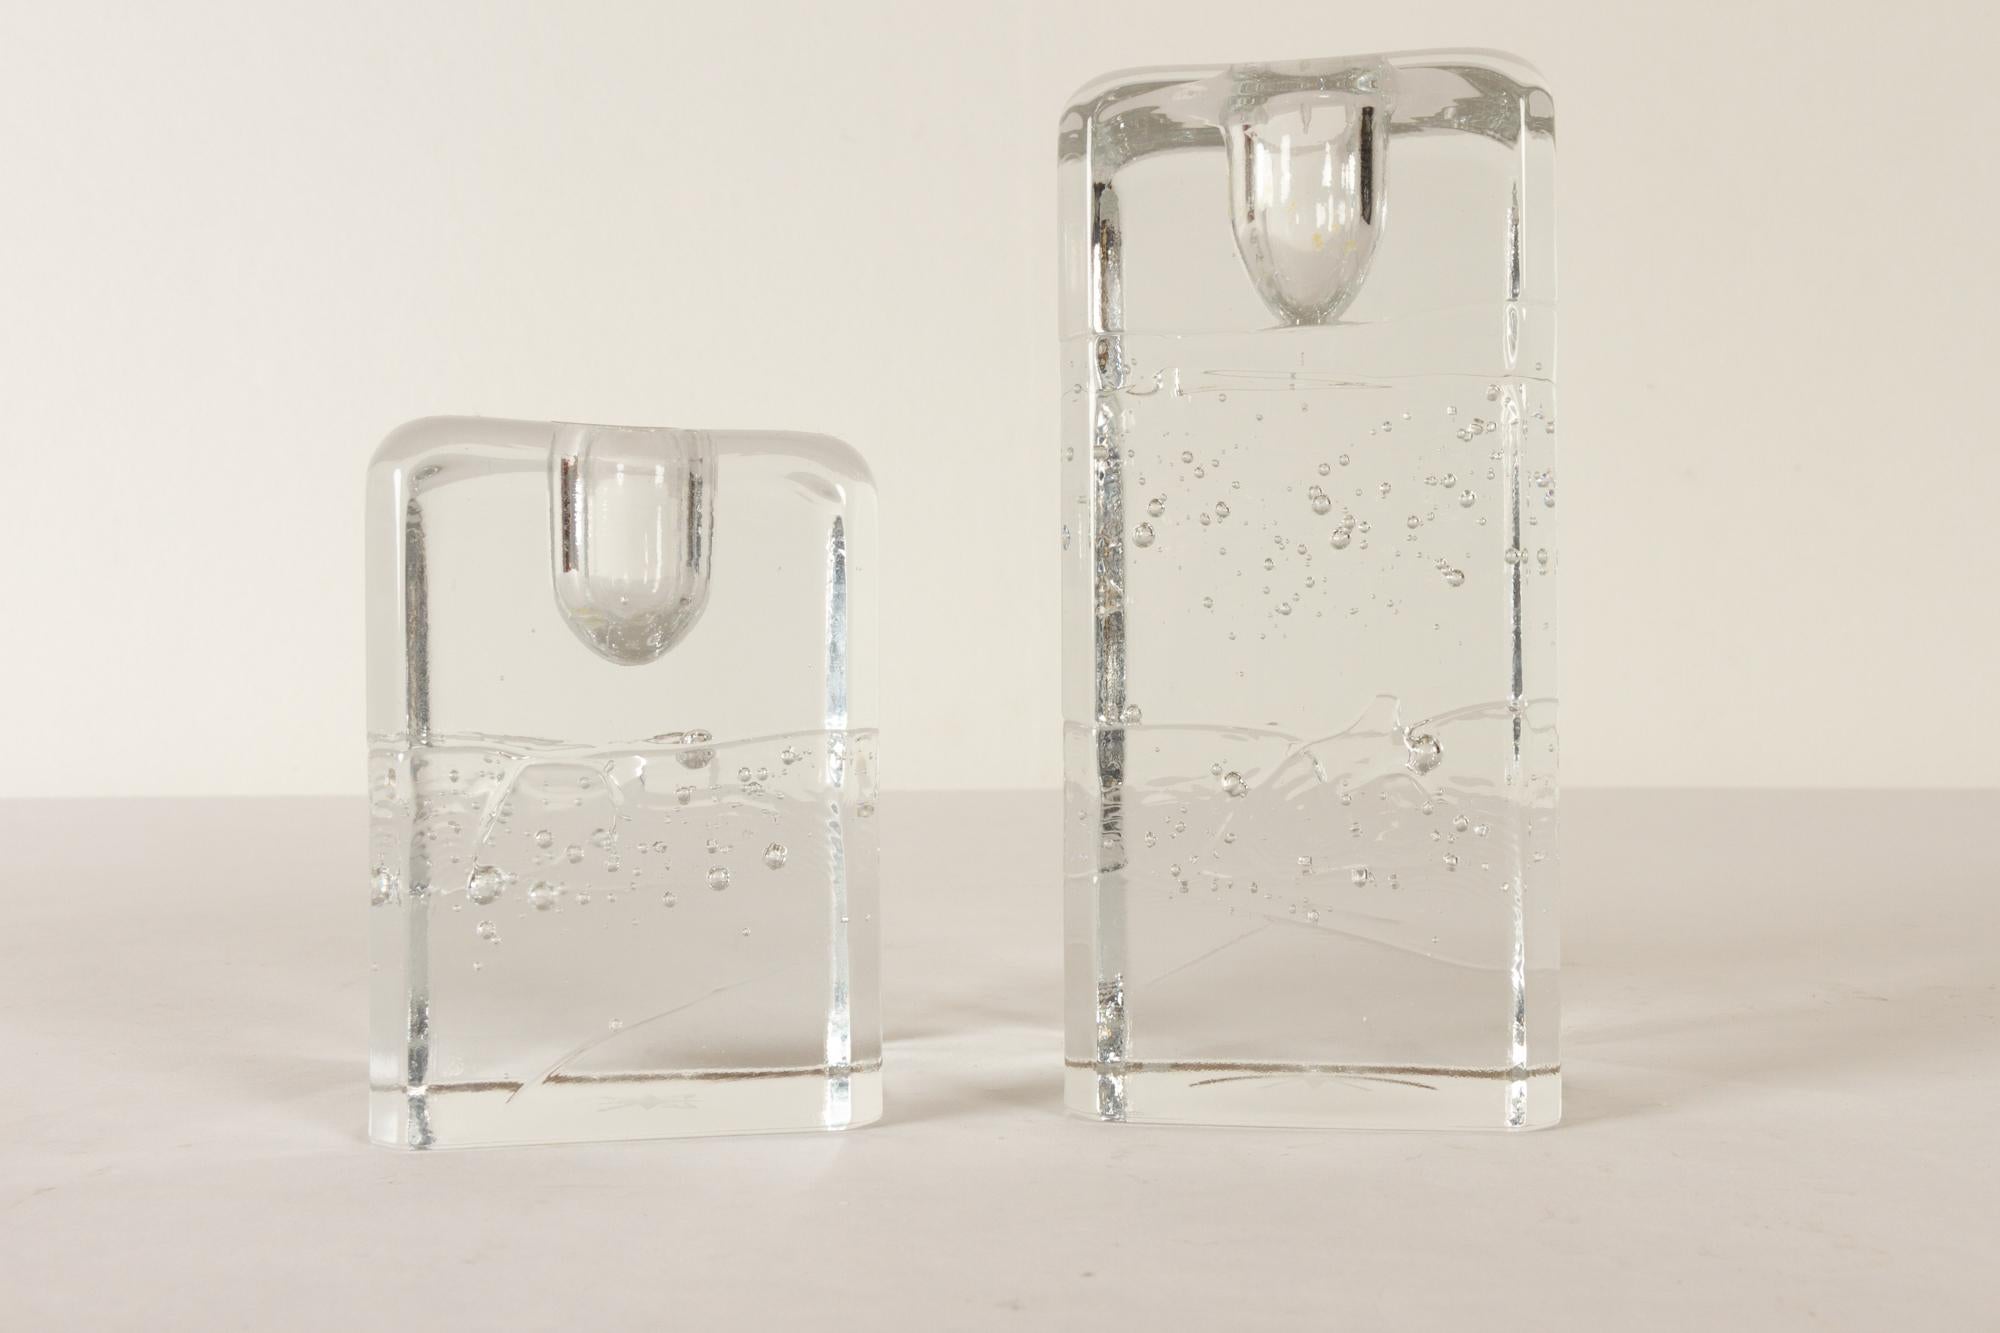 Arkipelago candlesticks by Timo Sarpaneva for Iittala, 1970s, set of 2
Pair of candleholders in clear crystal cast glass with air bubbles inside. They were created to appear as they were blocks of ice. Designed in the 1970s by Timo Sarpaneva in